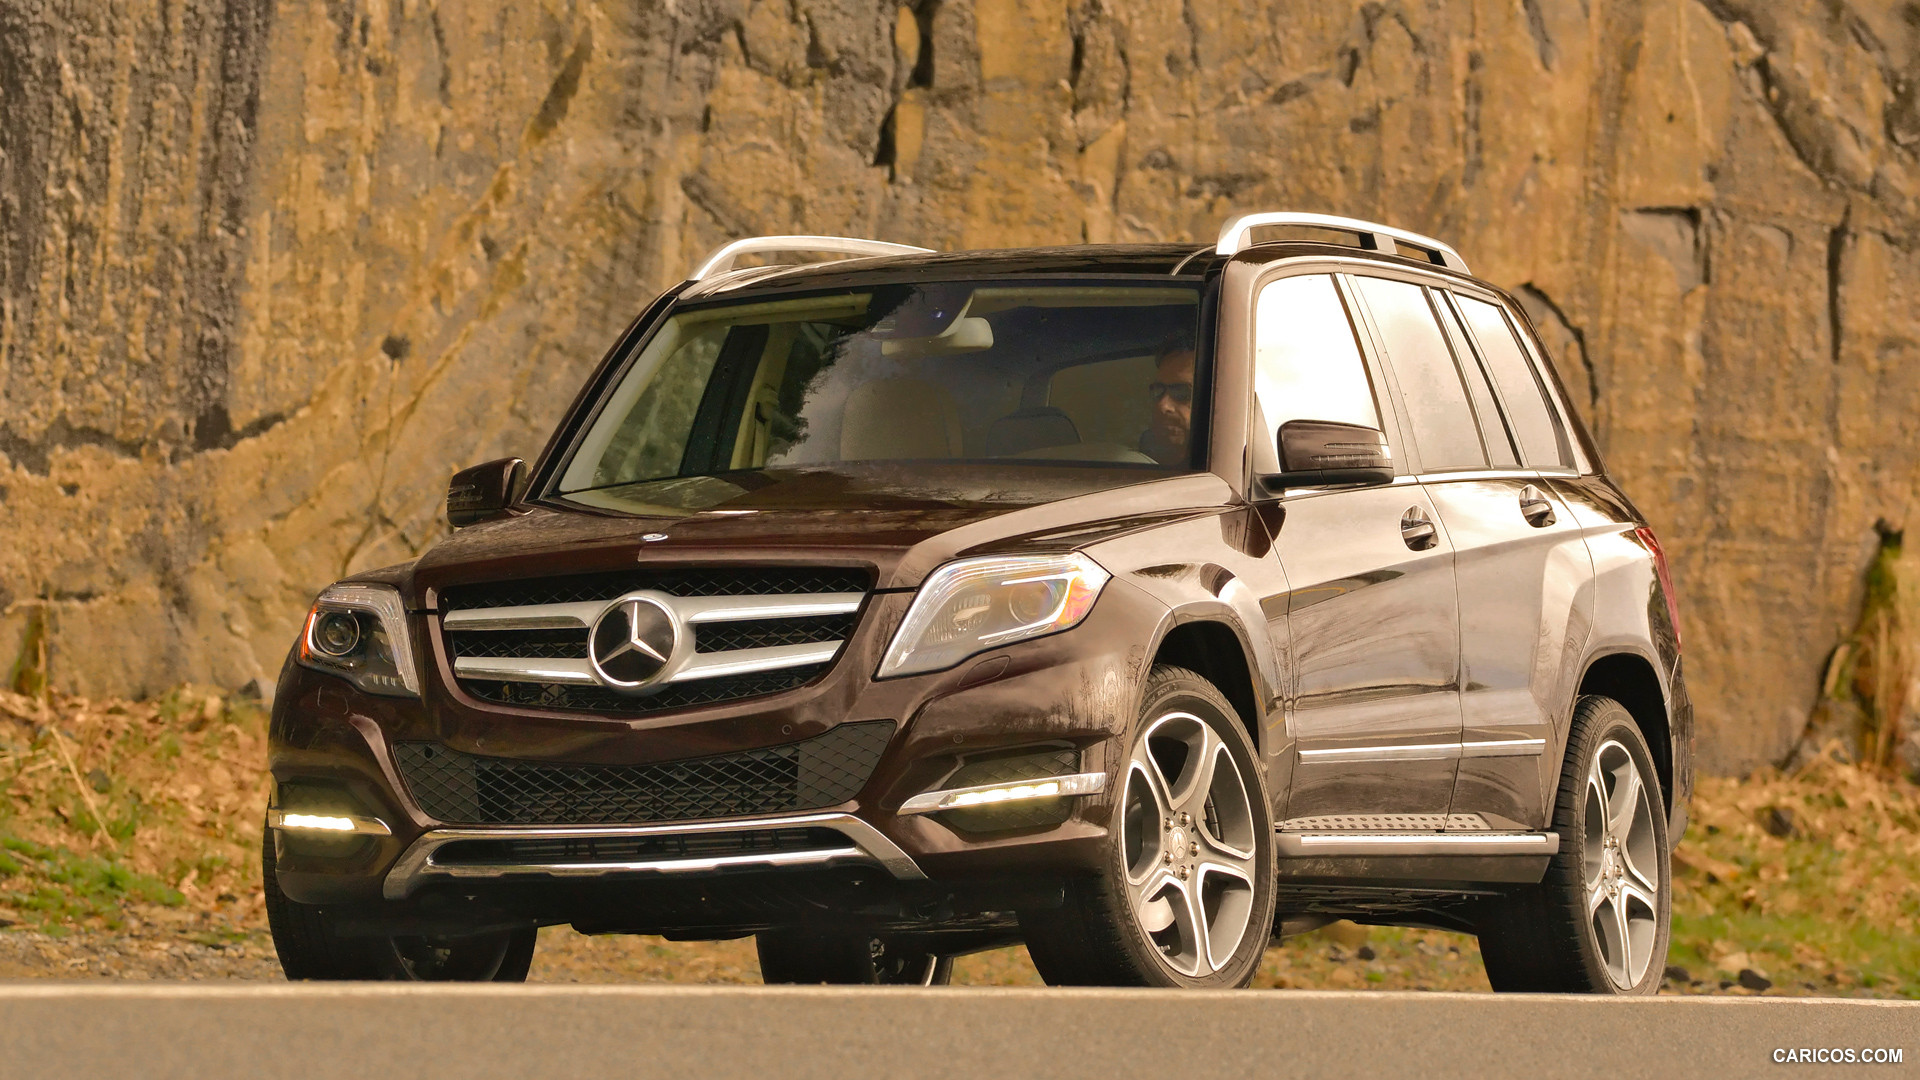 2013 Mercedes-Benz GLK250 BlueTEC (Fully Equipped) - Front, #62 of 109